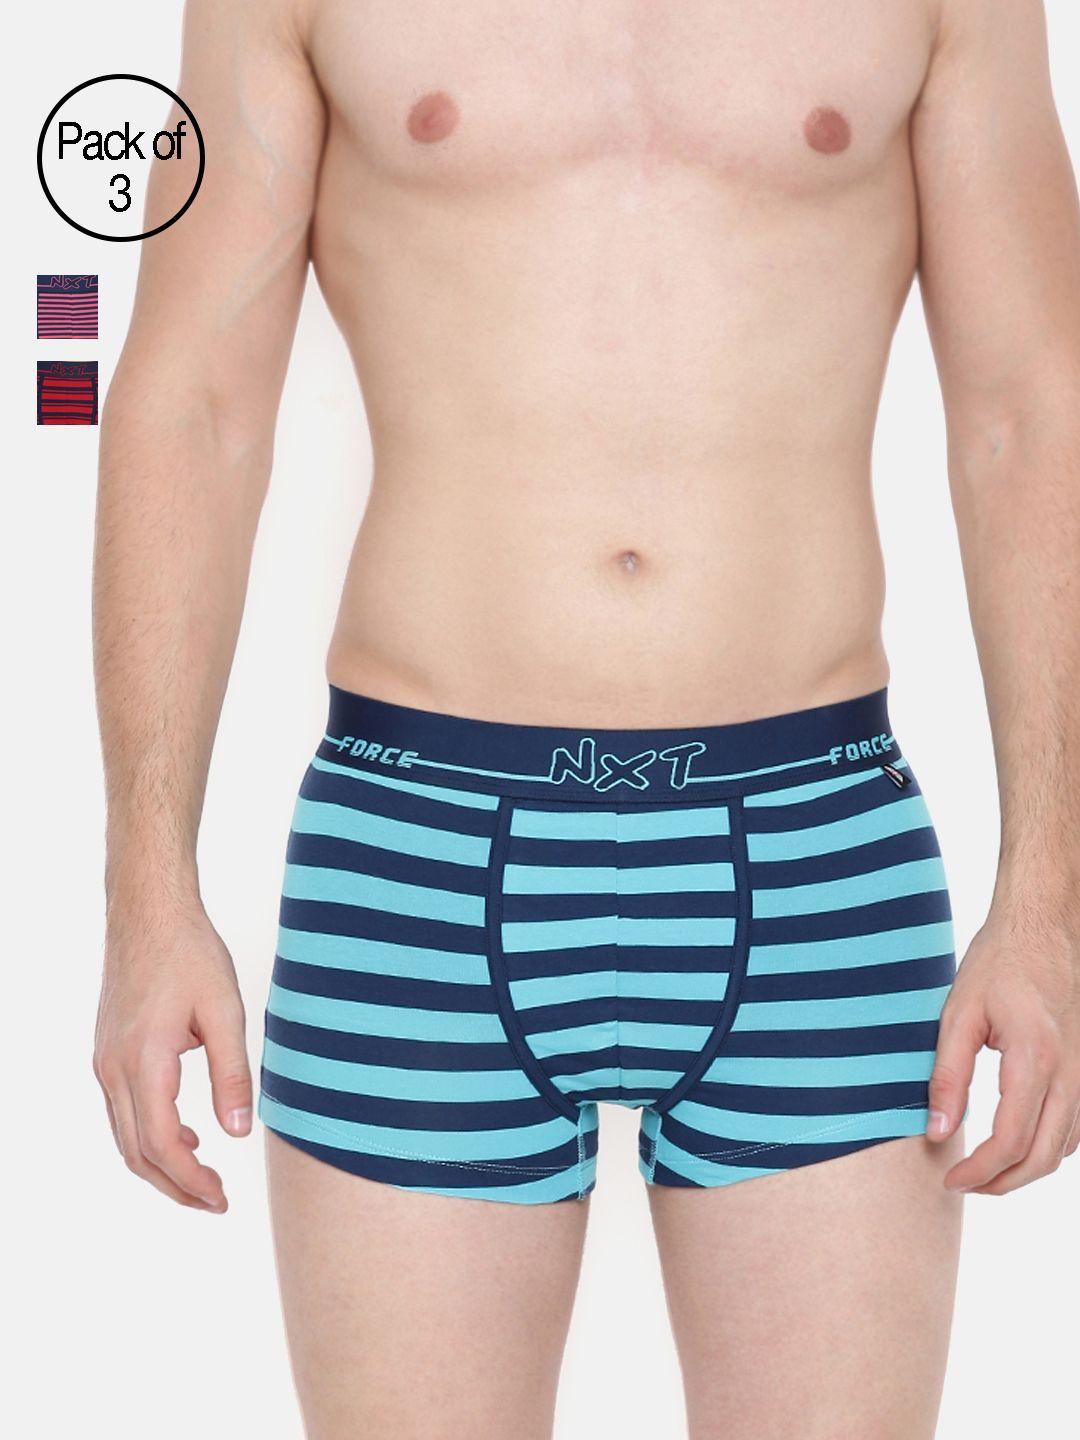 force nxt men pack of 3 striped assorted trunks mnfl-66-po3